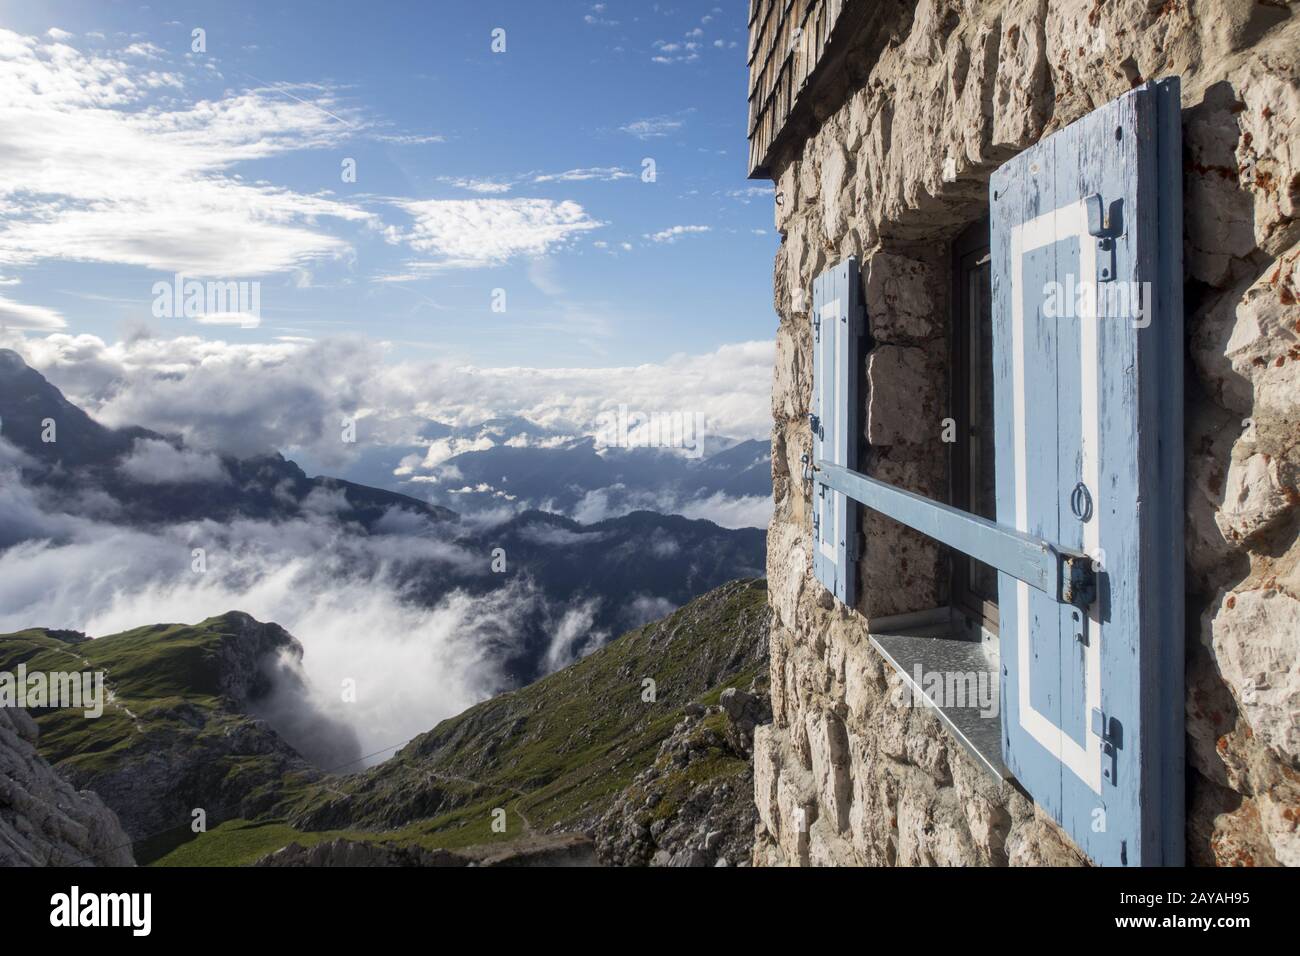 Windows of the Meiler-Hut in the Alps Stock Photo